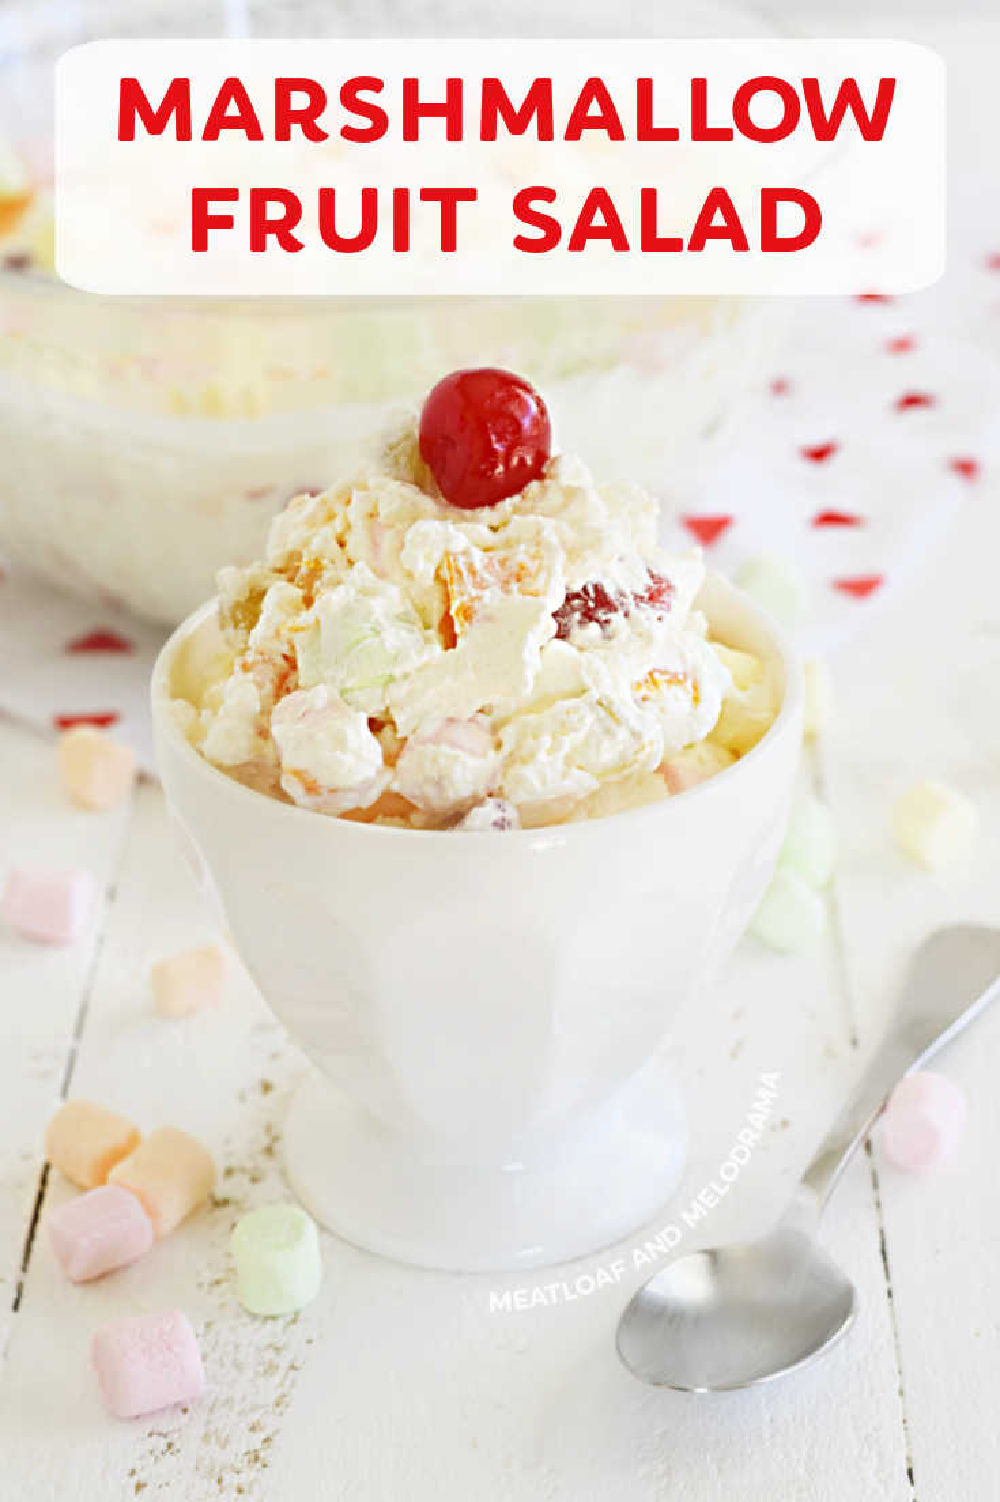 This easy Marshmallow Fruit Salad recipe with Cool Whip is an easy fruit salad made with fruit cocktail and whipped topping. Just 3 ingredients! This easy recipe is on the menu for every special occasion and family gathering, and even Kids can make it! via @meamel